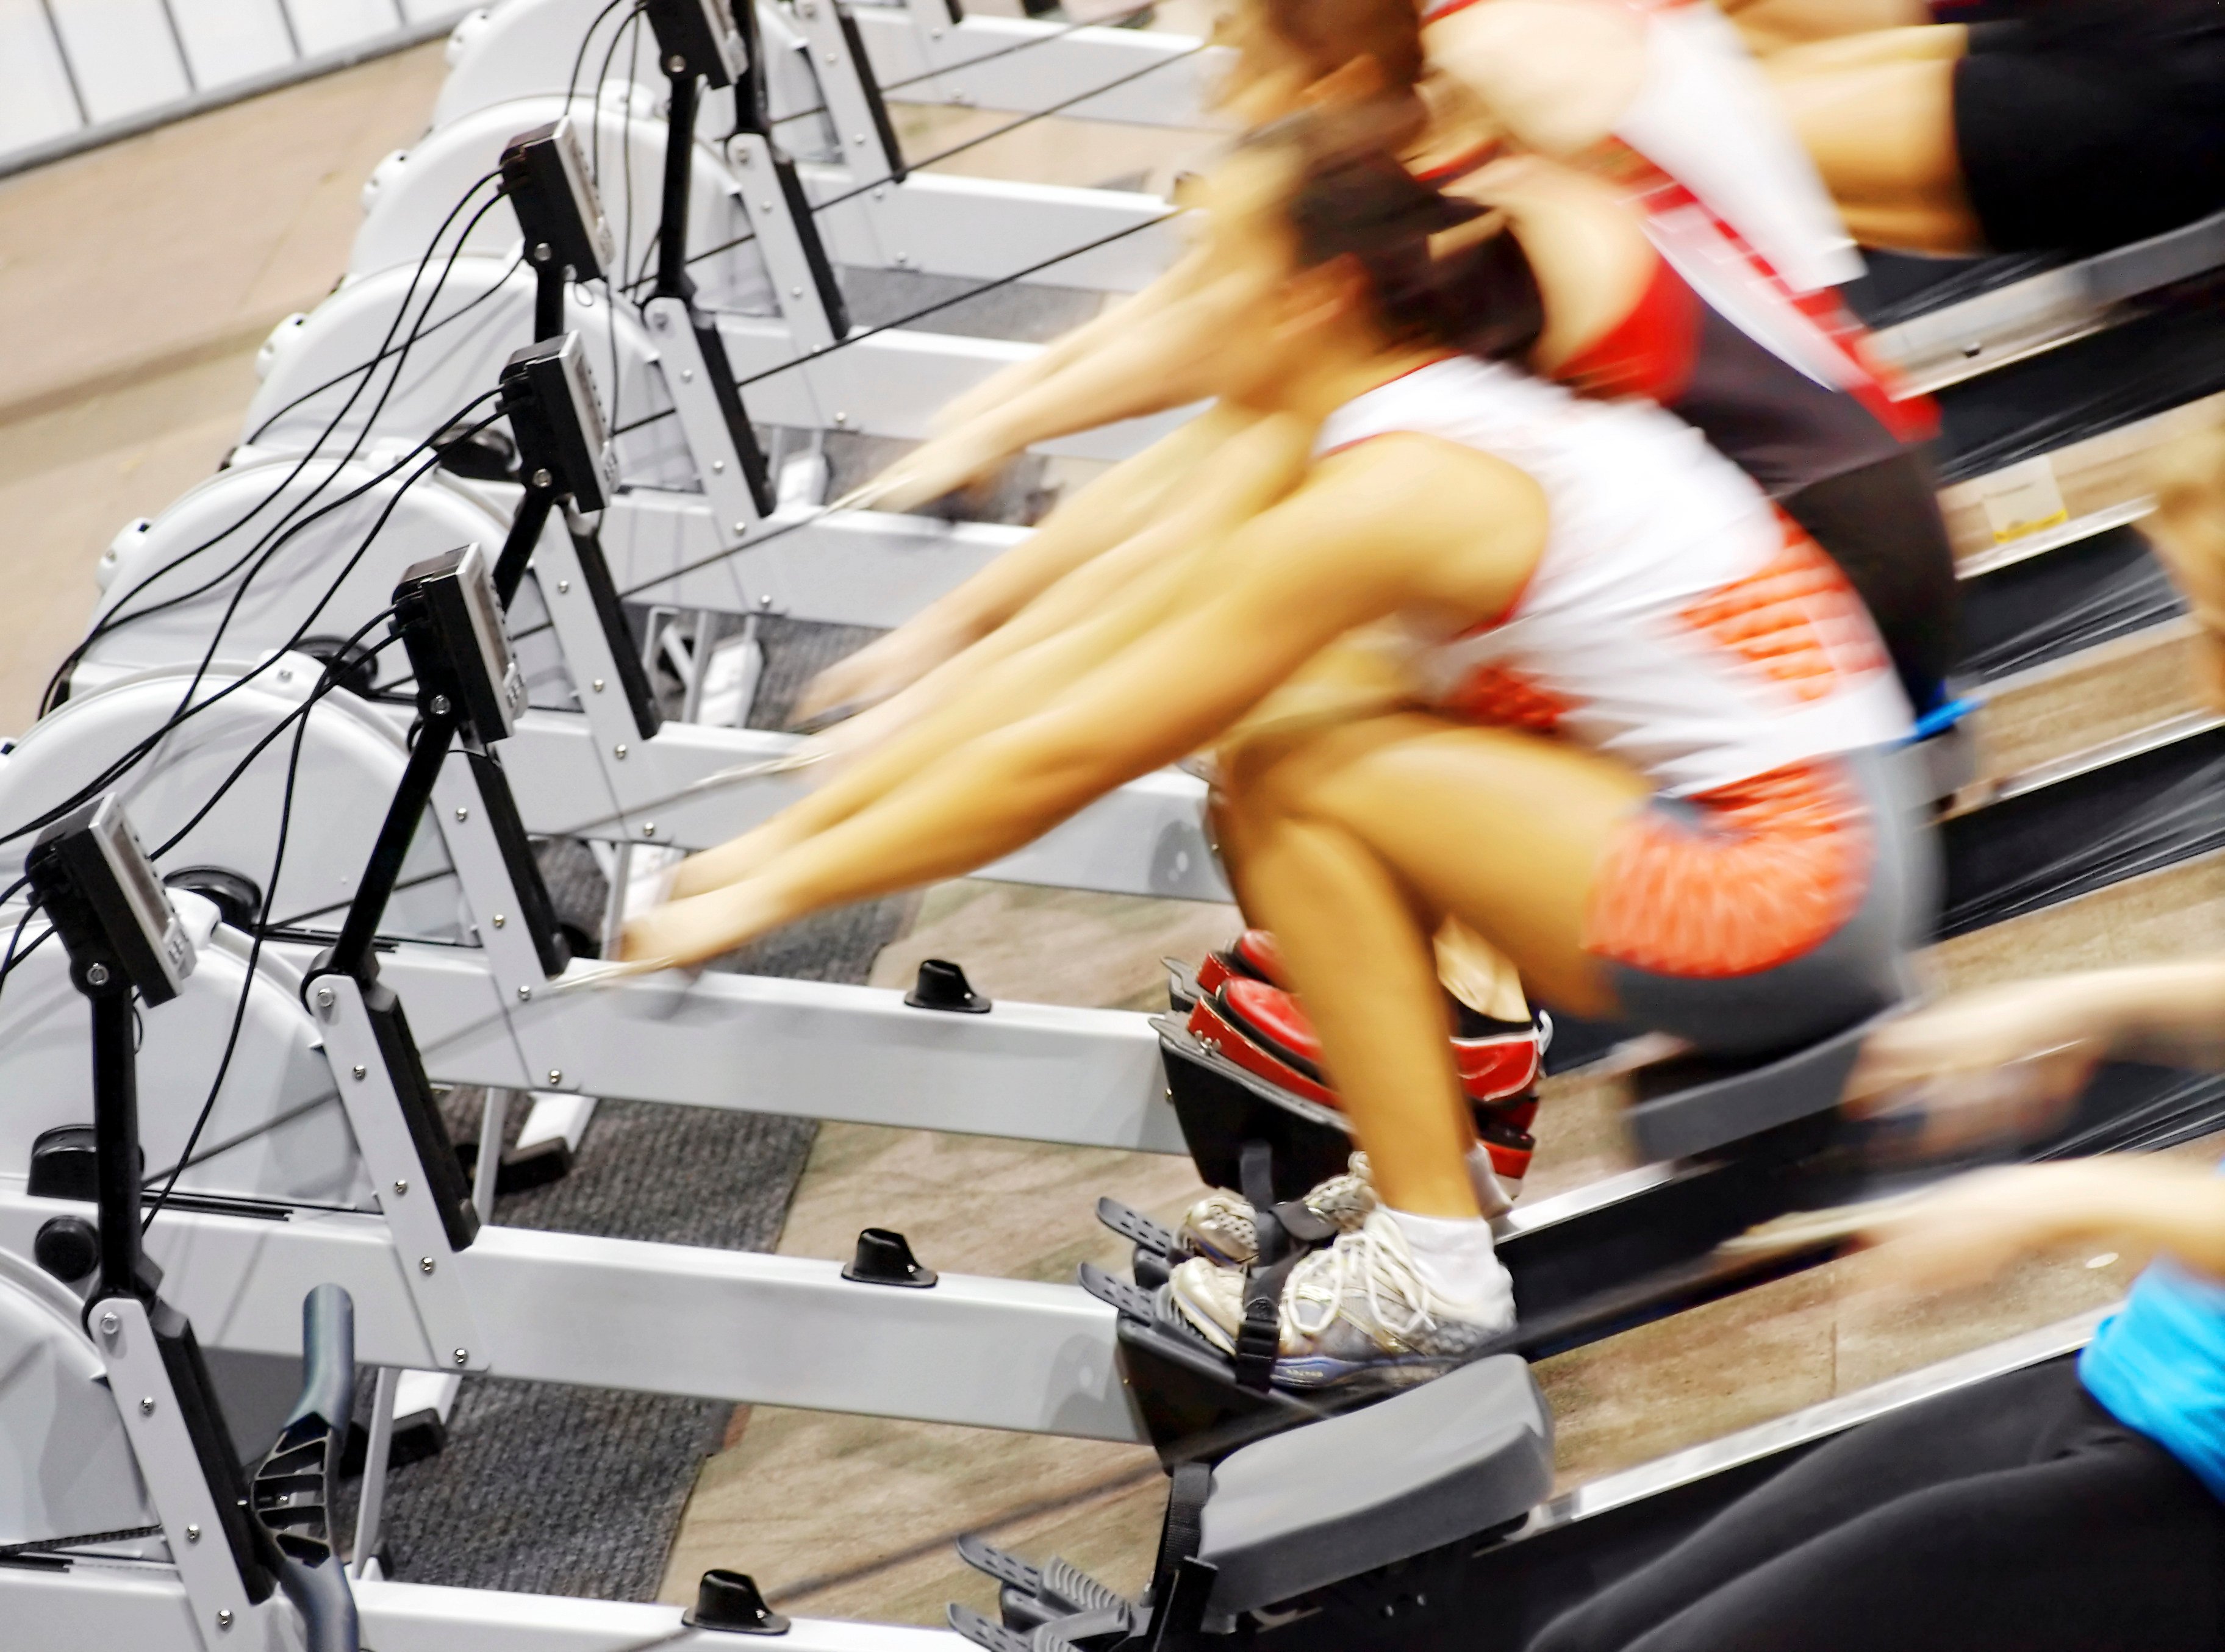 Women-only fitness centres and other services are springing up in multiple cities in China. Photo: Shutterstock